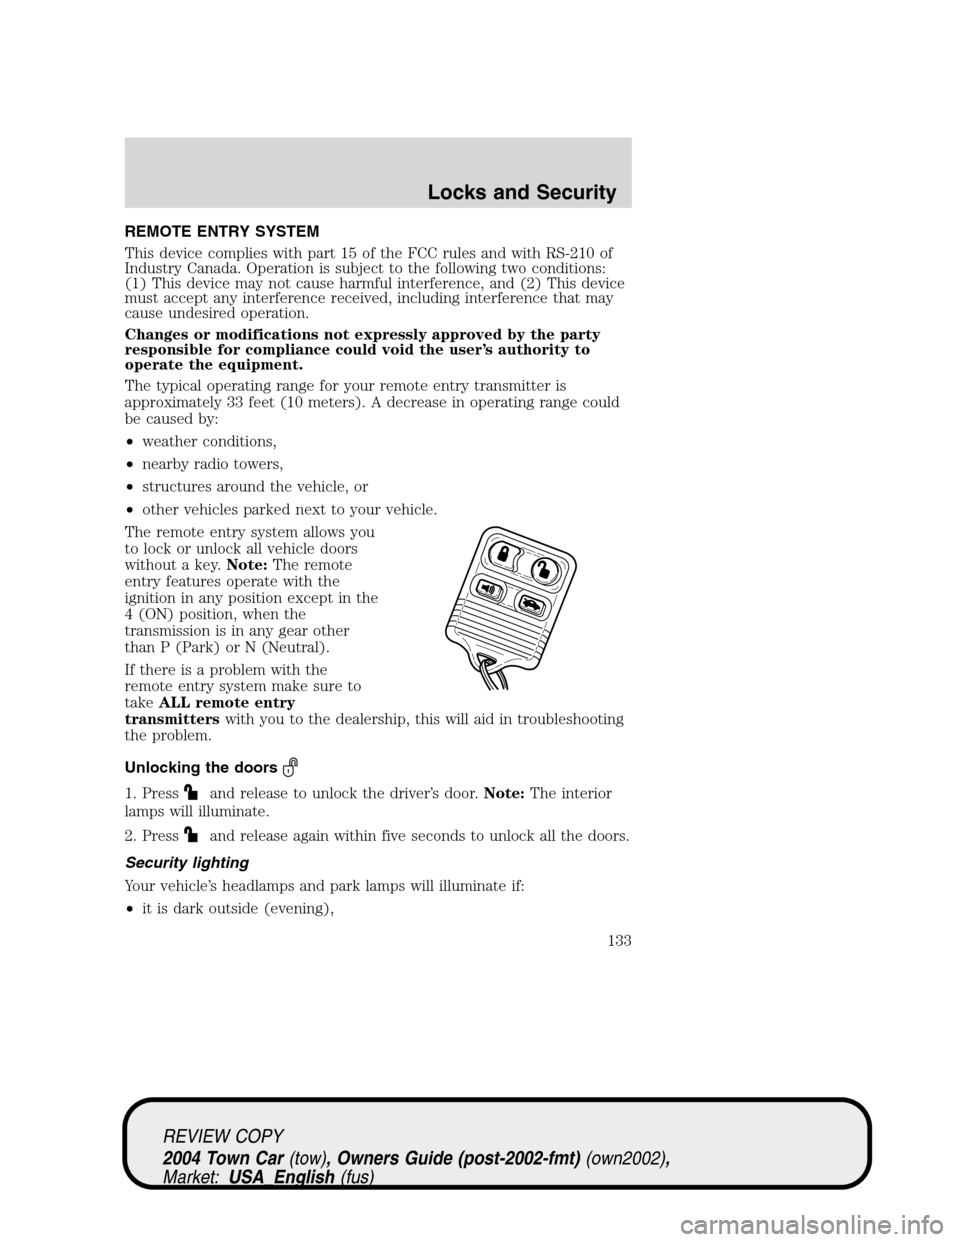 LINCOLN TOWN CAR 2004  Owners Manual REMOTE ENTRY SYSTEM
This device complies with part 15 of the FCC rules and with RS-210 of
Industry Canada. Operation is subject to the following two conditions:
(1) This device may not cause harmful i